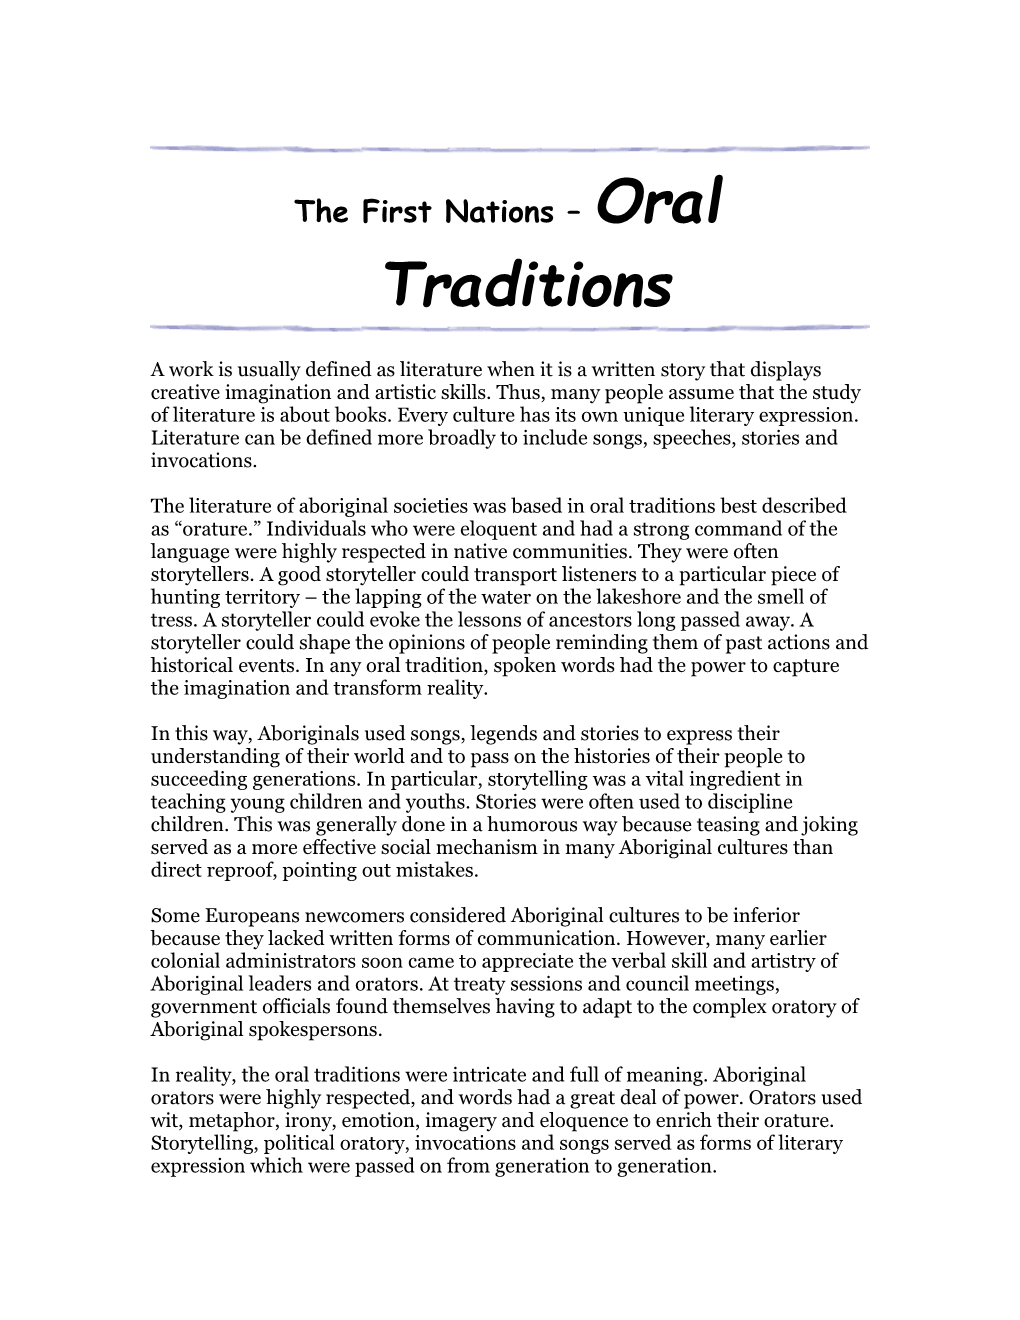 The First Nations Oral Traditions